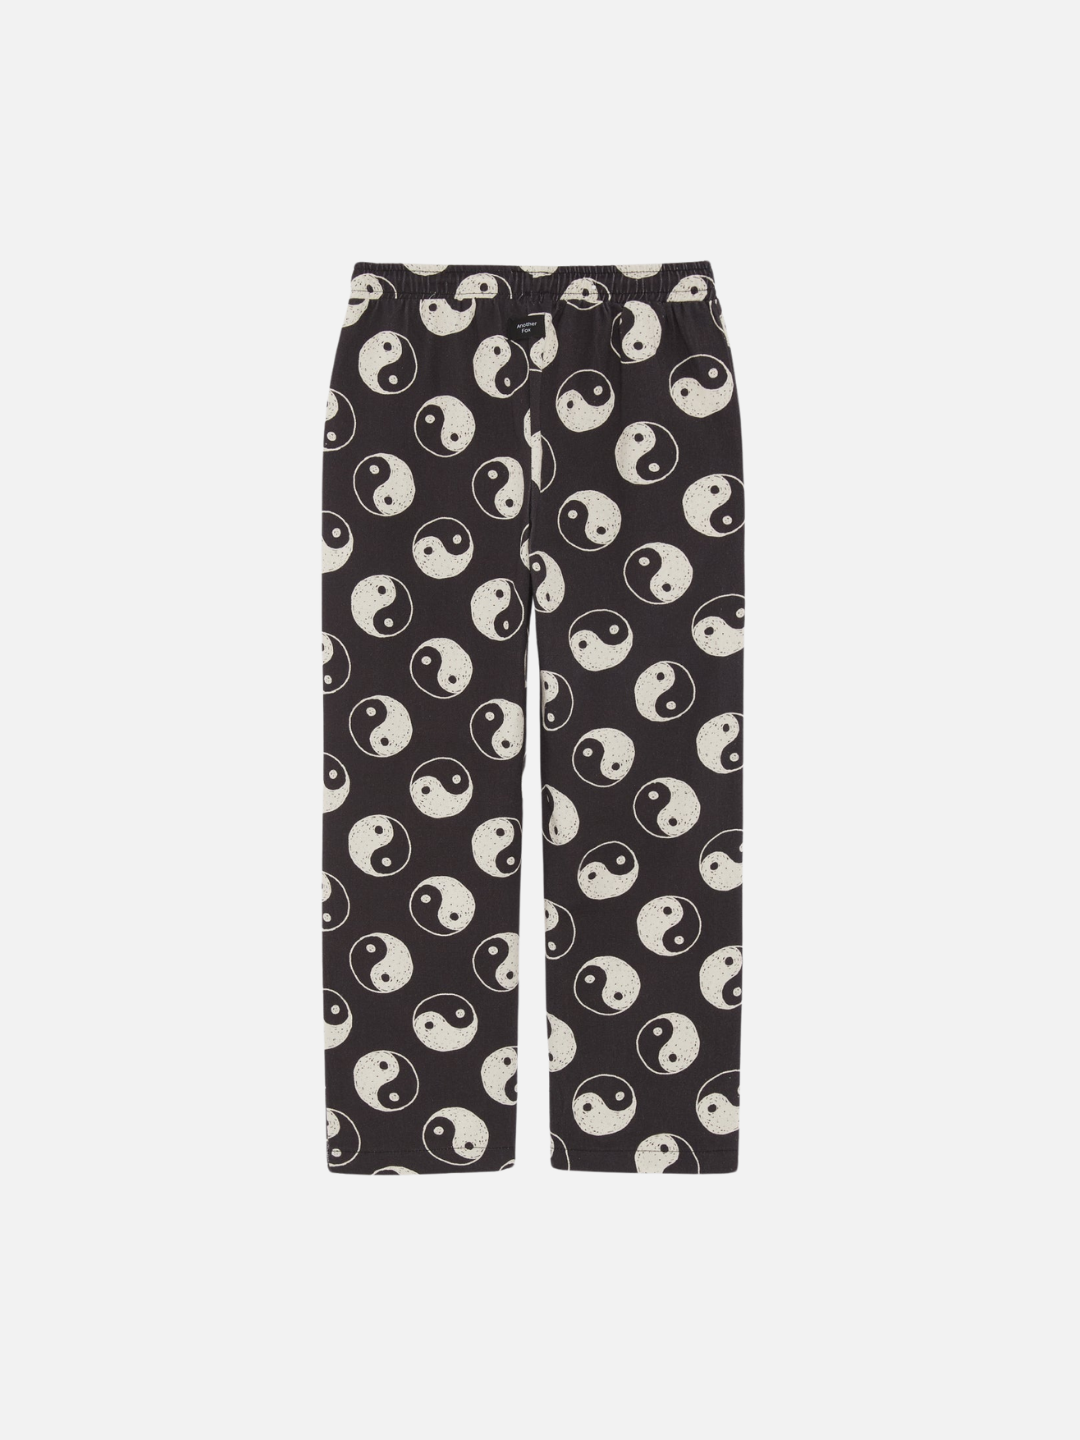 A back view of the drawstring black pants with a yin and yang pattern all over.